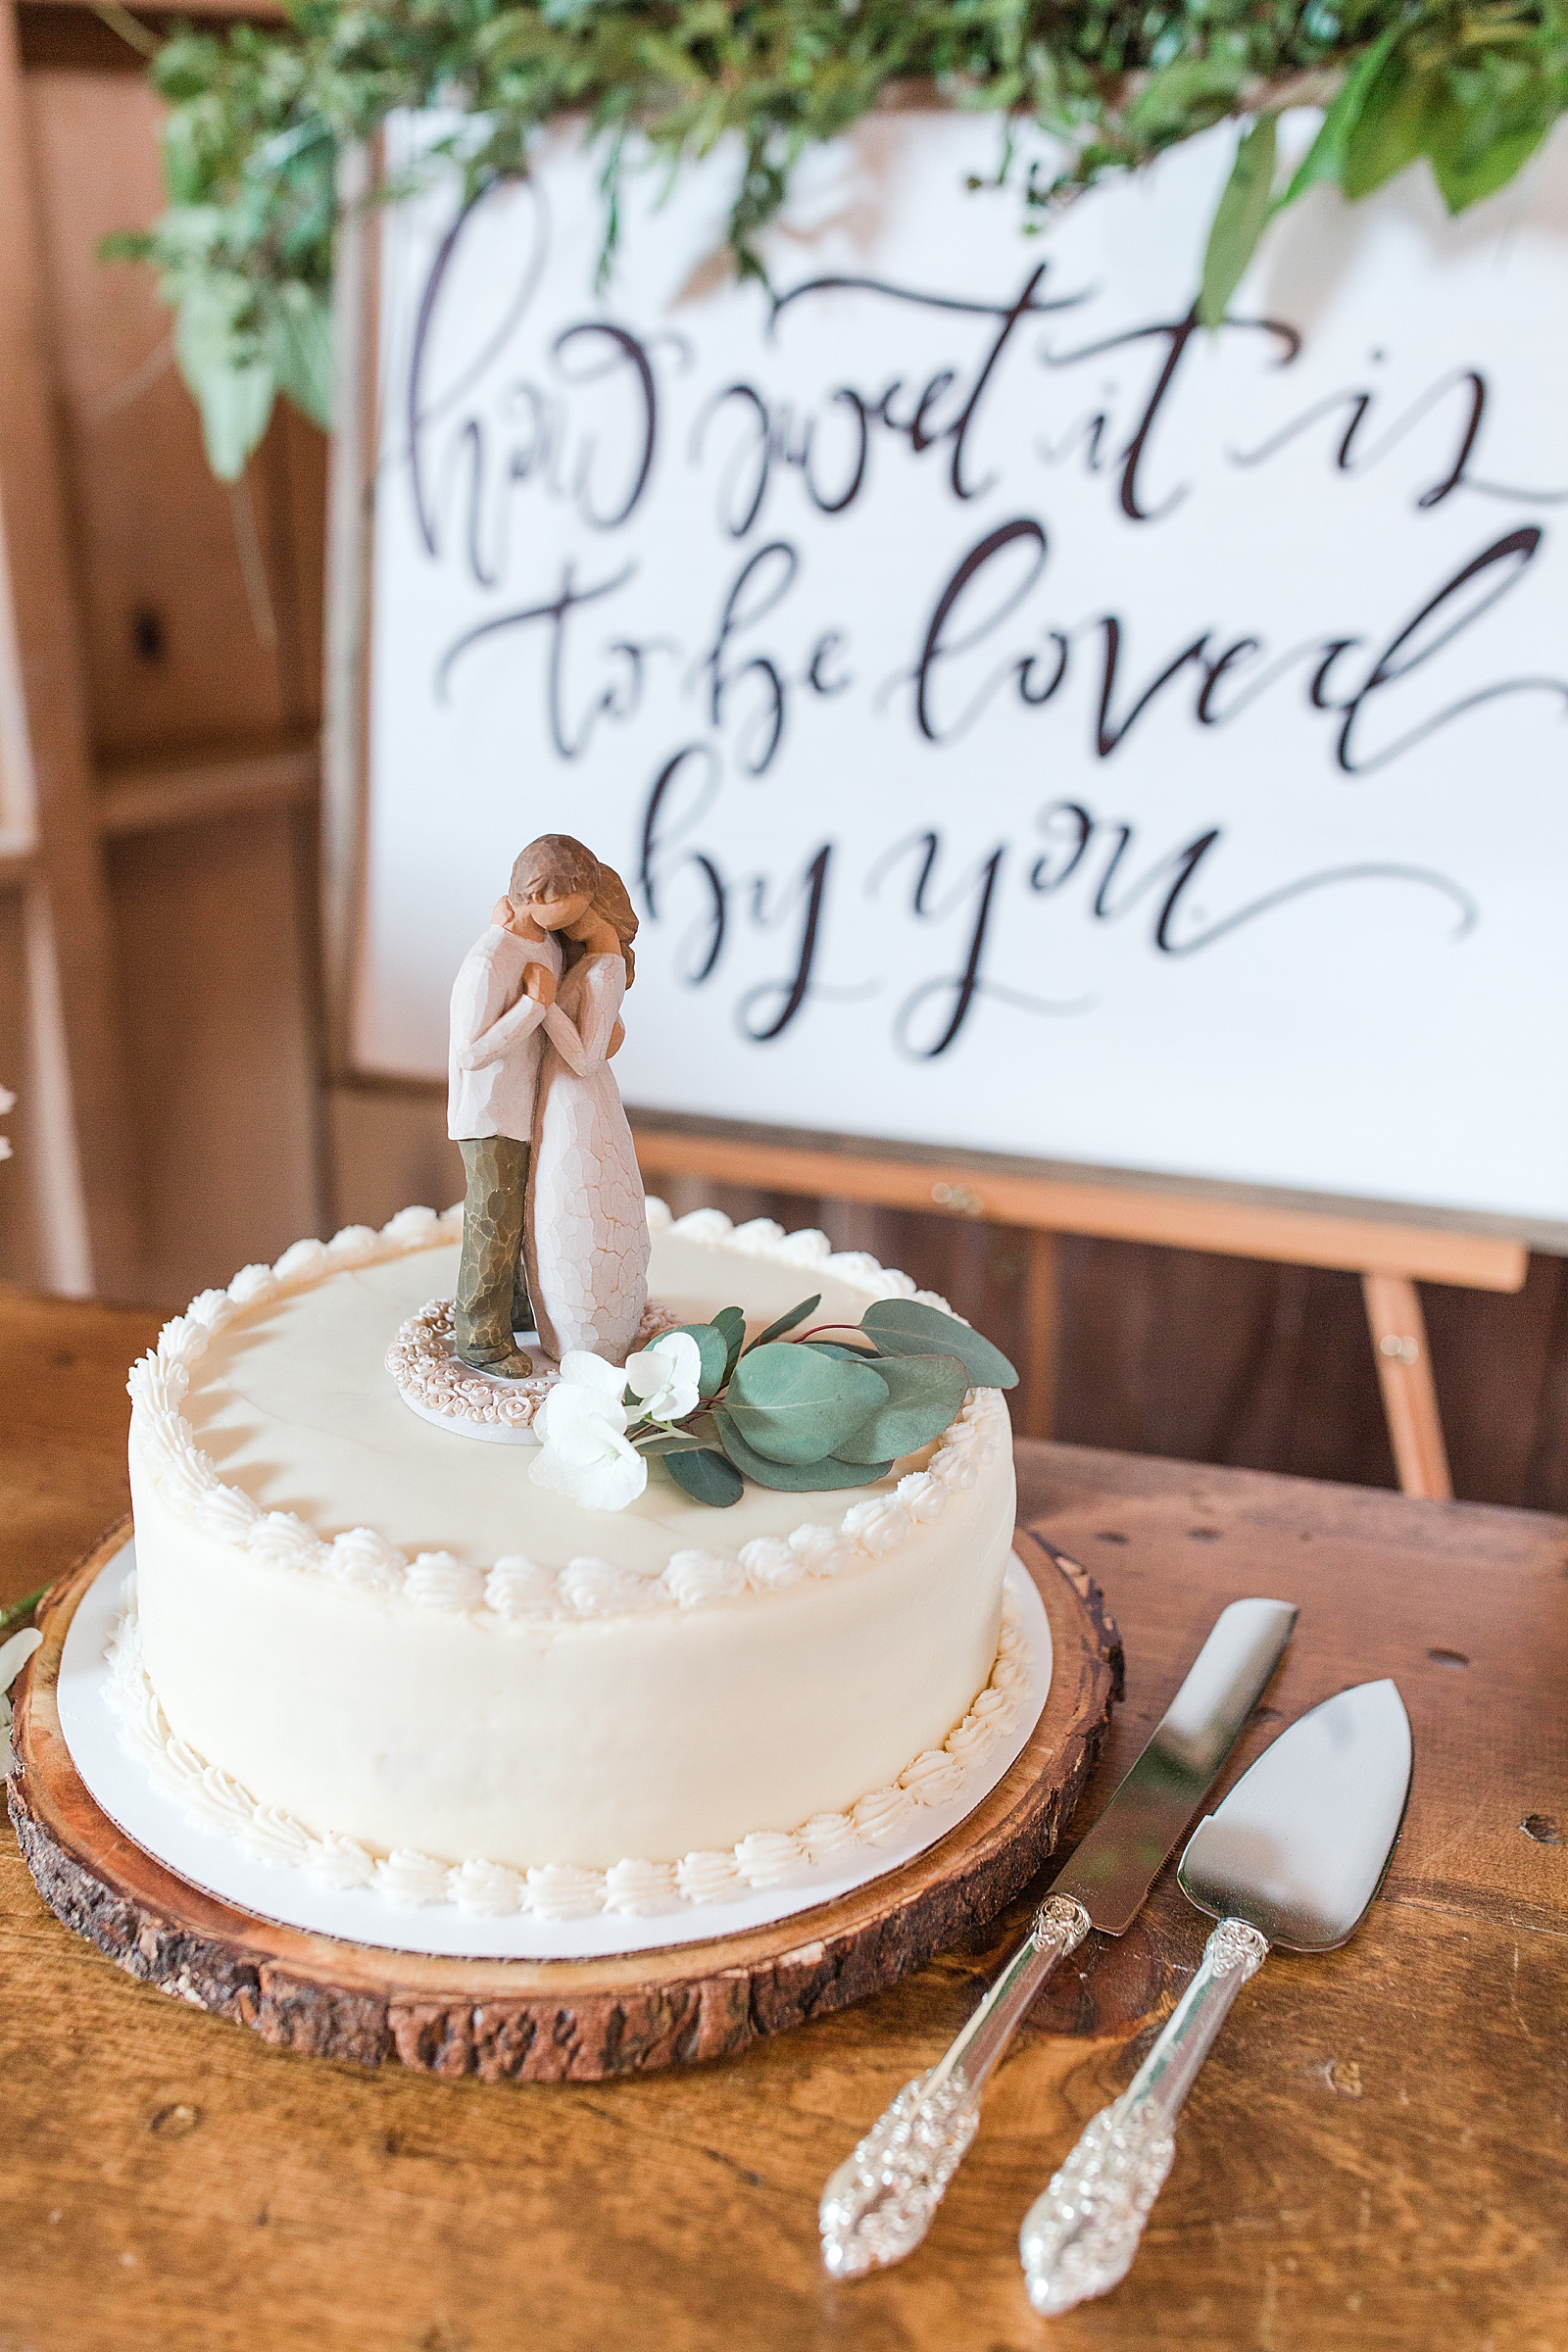 Macedonia Hills Wedding Reception Cake with Willow tree bride and groom cake topper Photo